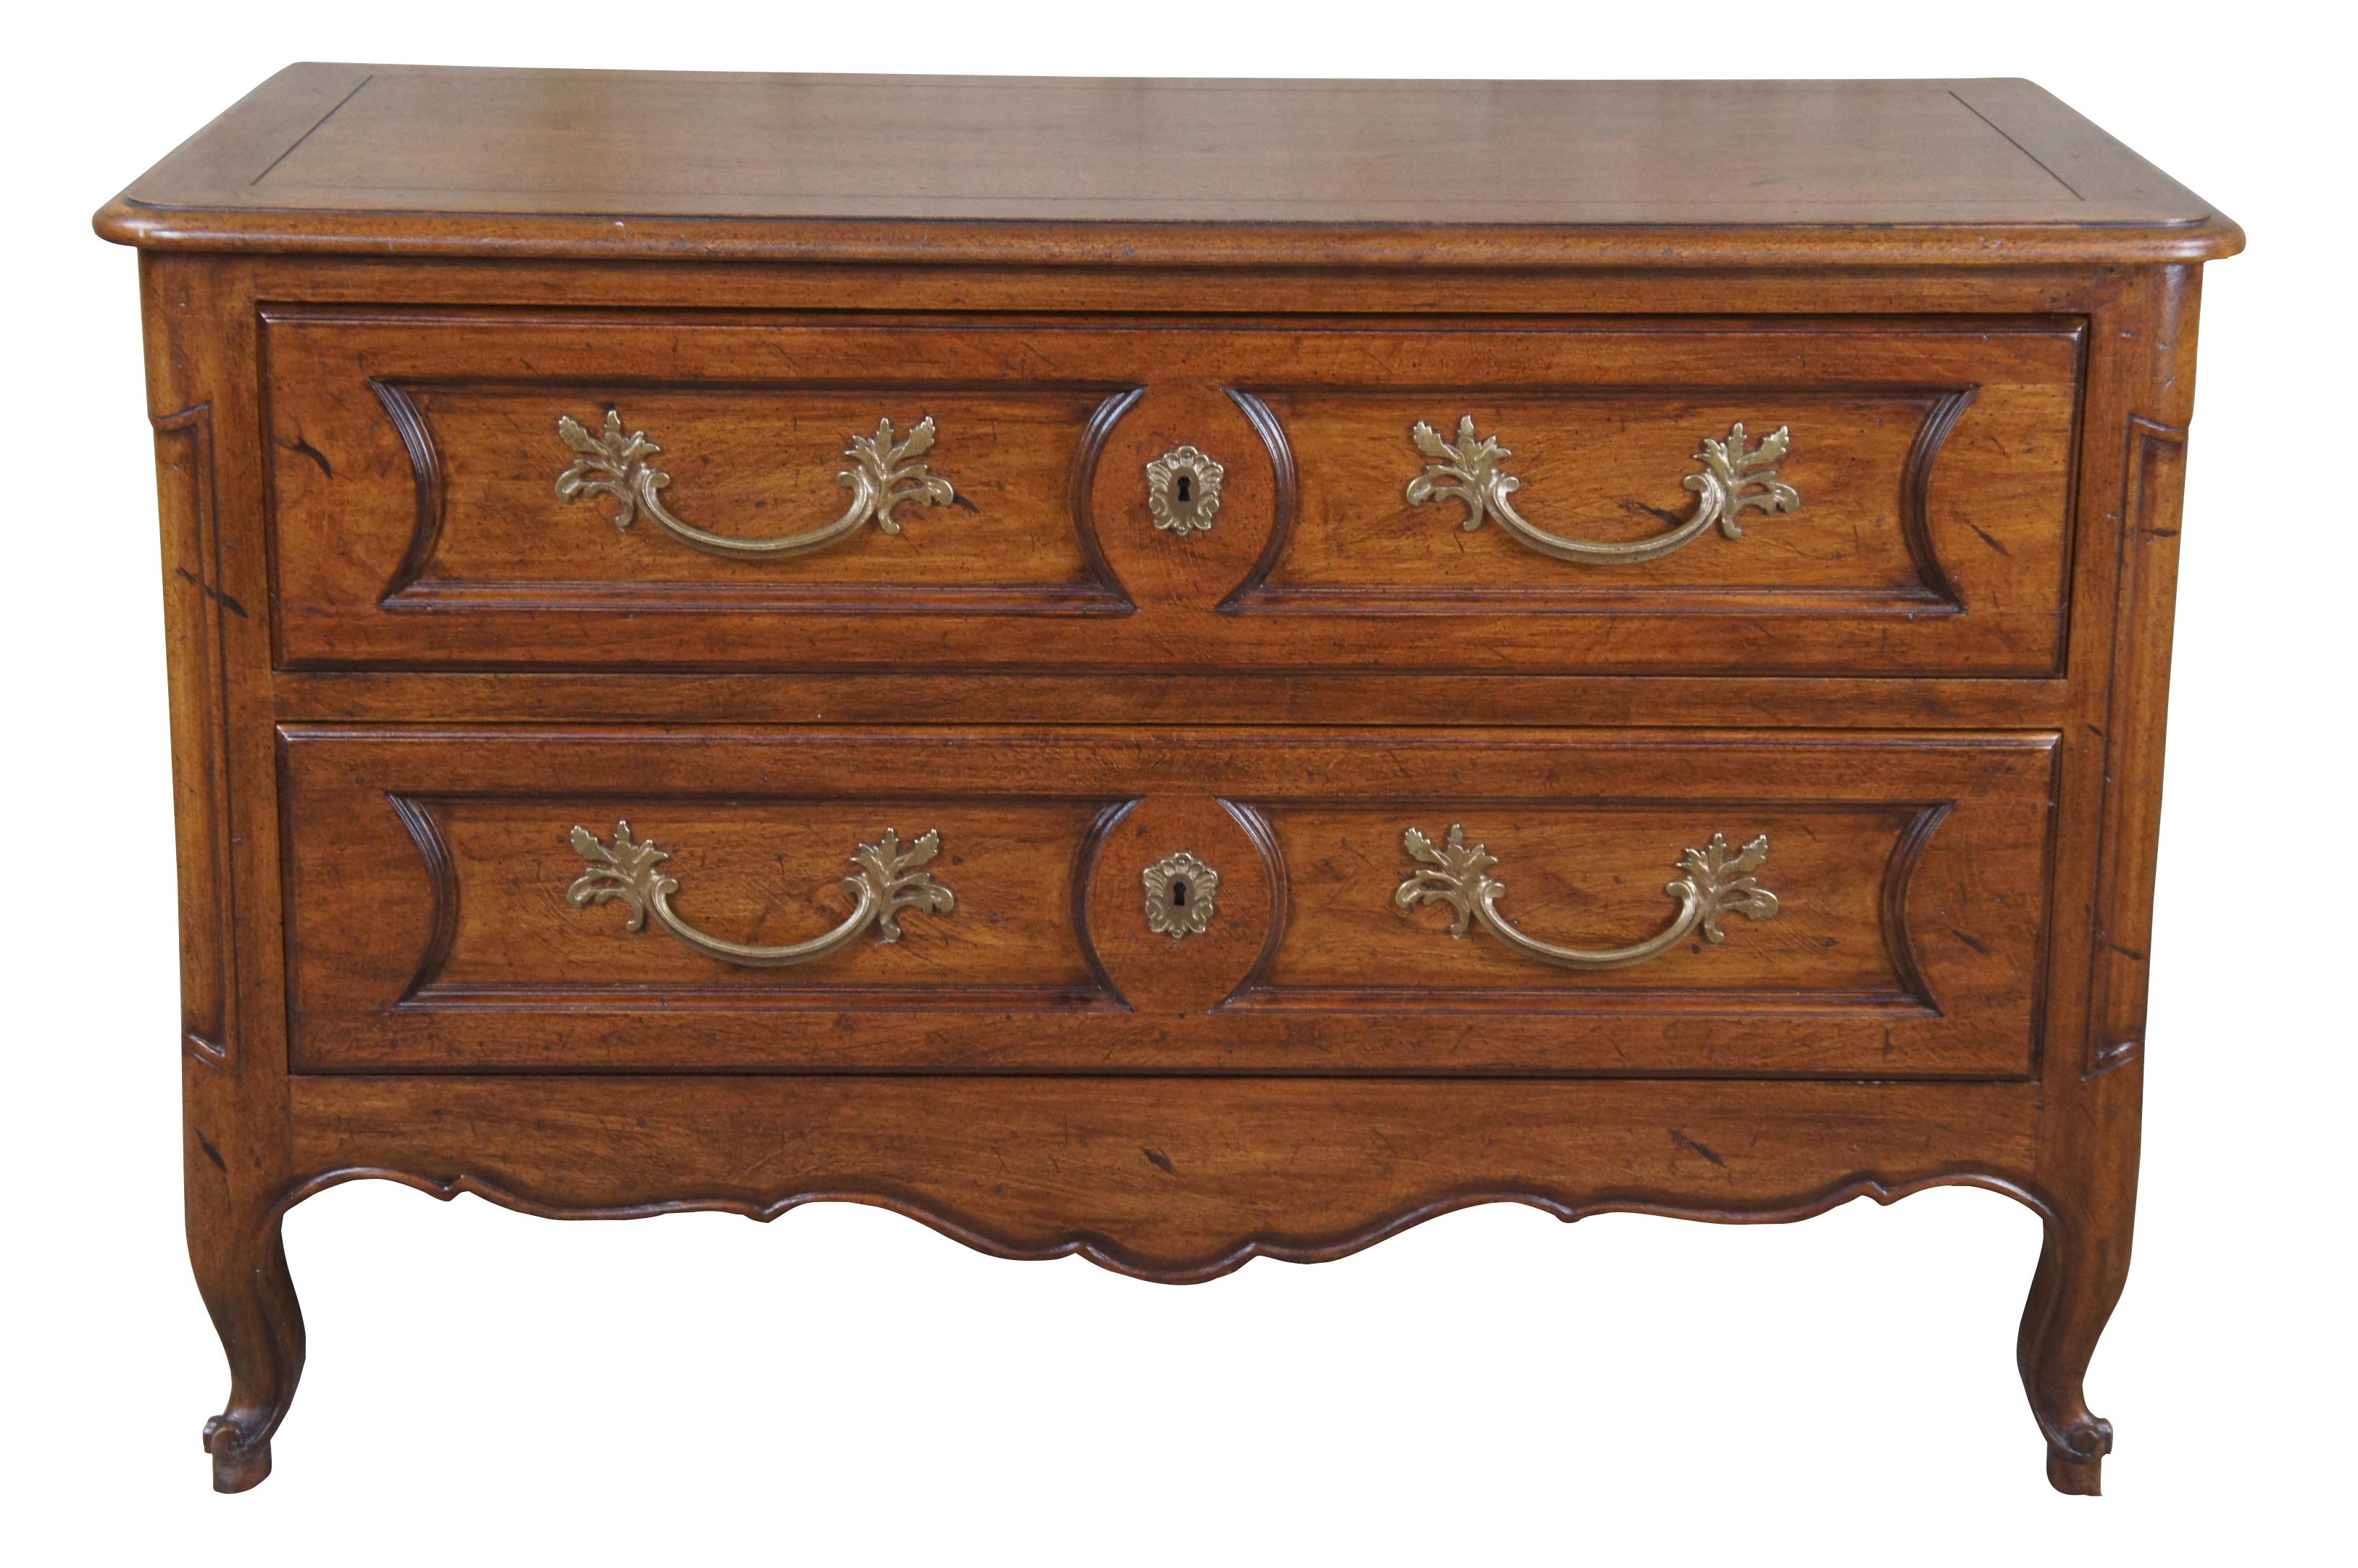 Vintage Mt. Airy walnut French Provincial / Country lowboy chest, dresser or stand featuring rectangular serpentine form with two drawers, brass hardware and cabriole legs. 2483. 

Mount Airy of North Carolina's roots go back to 1888 when the